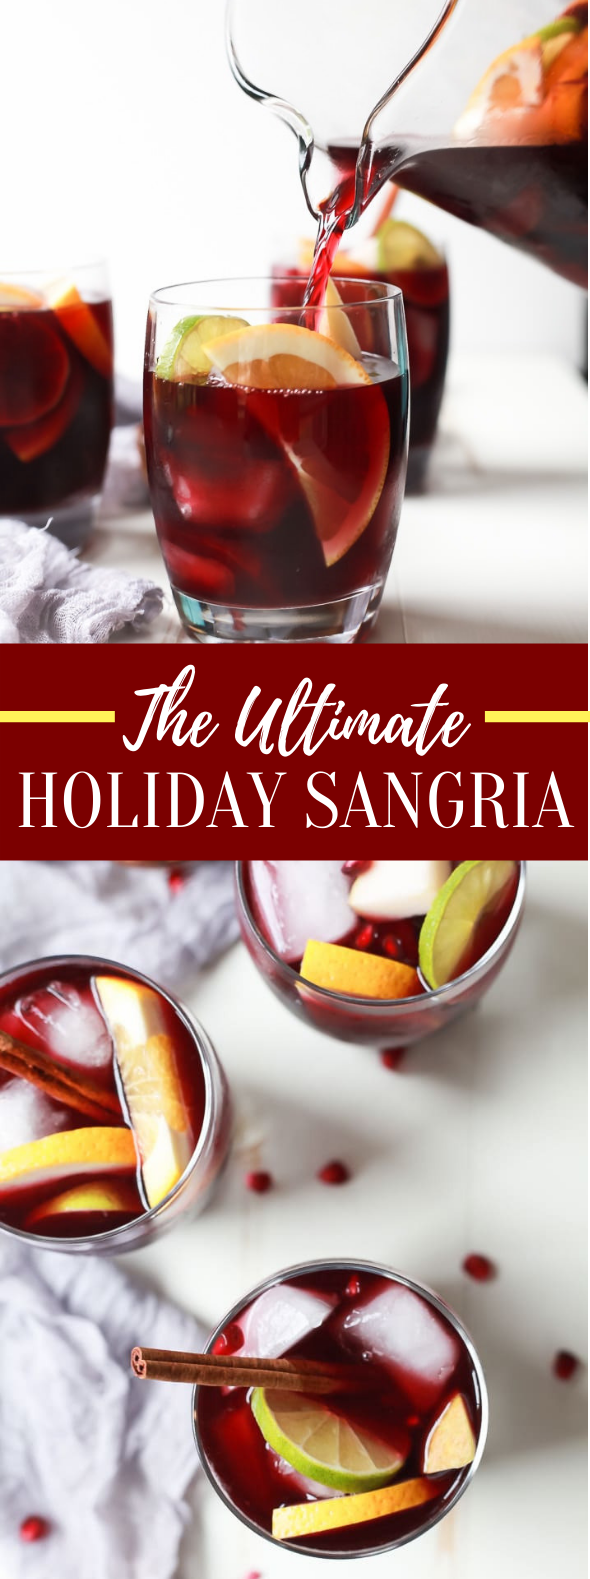 The Ultimate Holiday Sangria Recipe #drinks #cocktails